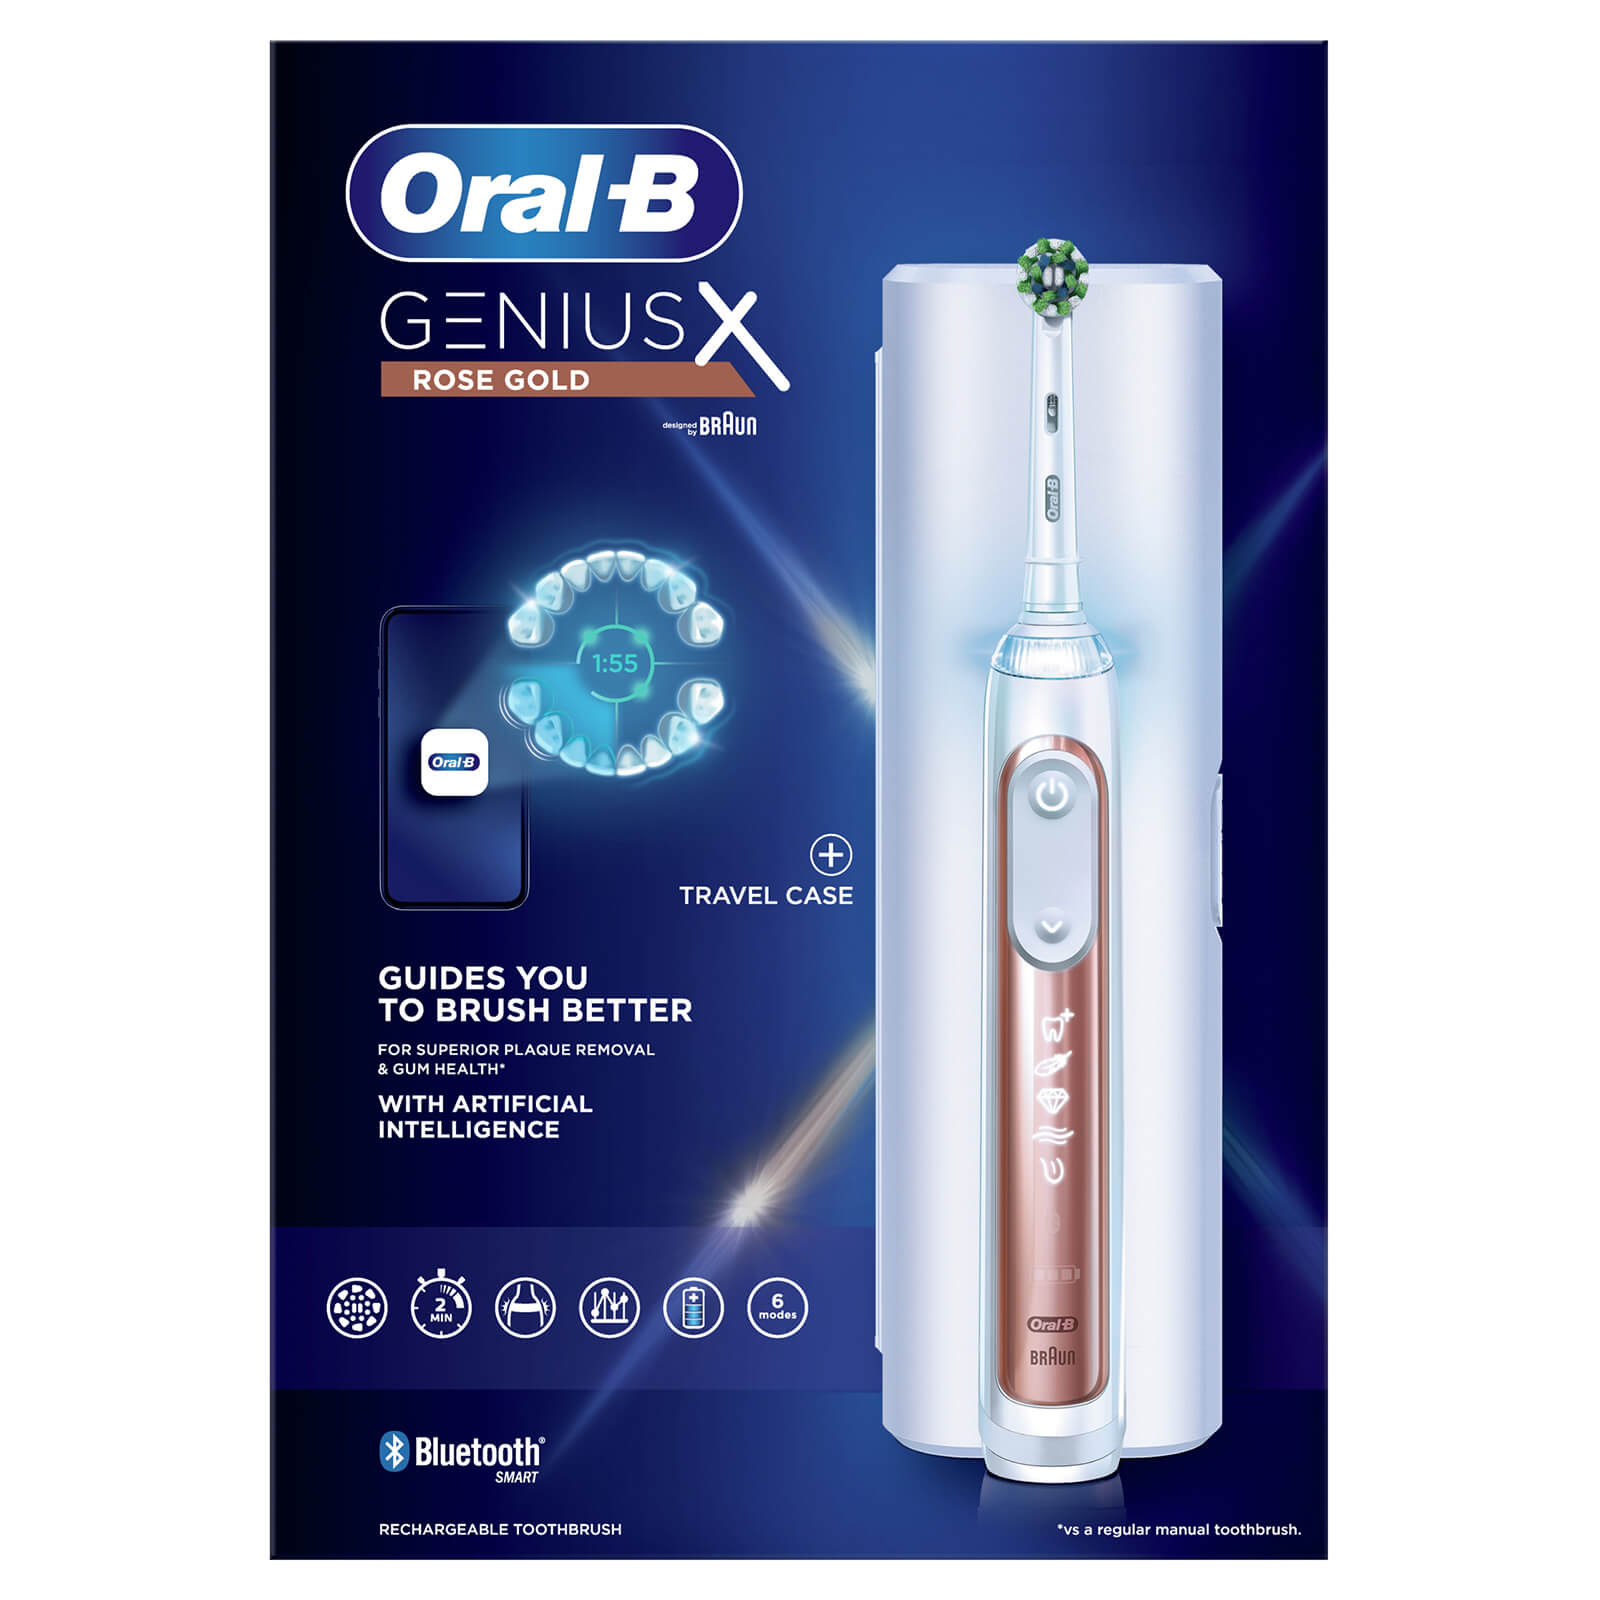 Oral-B Genius X Rose Gold Electric Toothbrush with Travel Case - Toothbrush